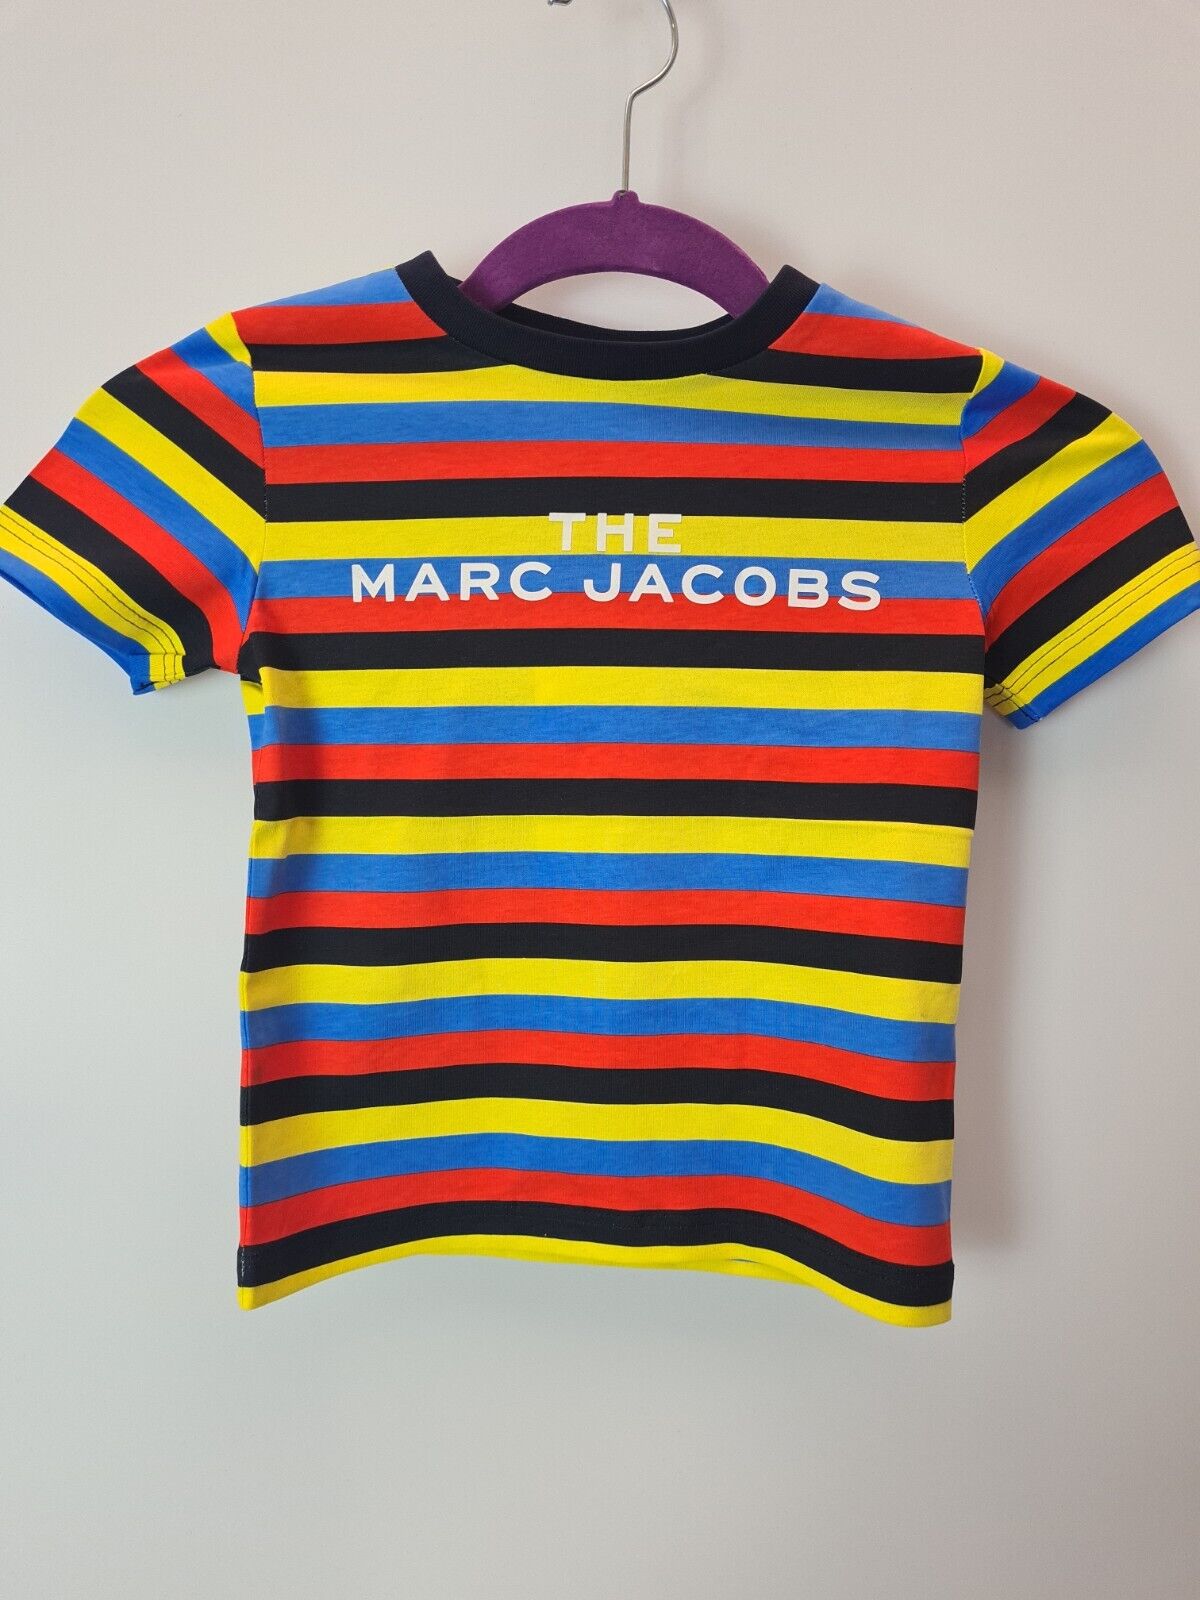 Marc Jacobs Boys Multi Coloured Striped Logo T-Shirt Size 6 Years **** V214